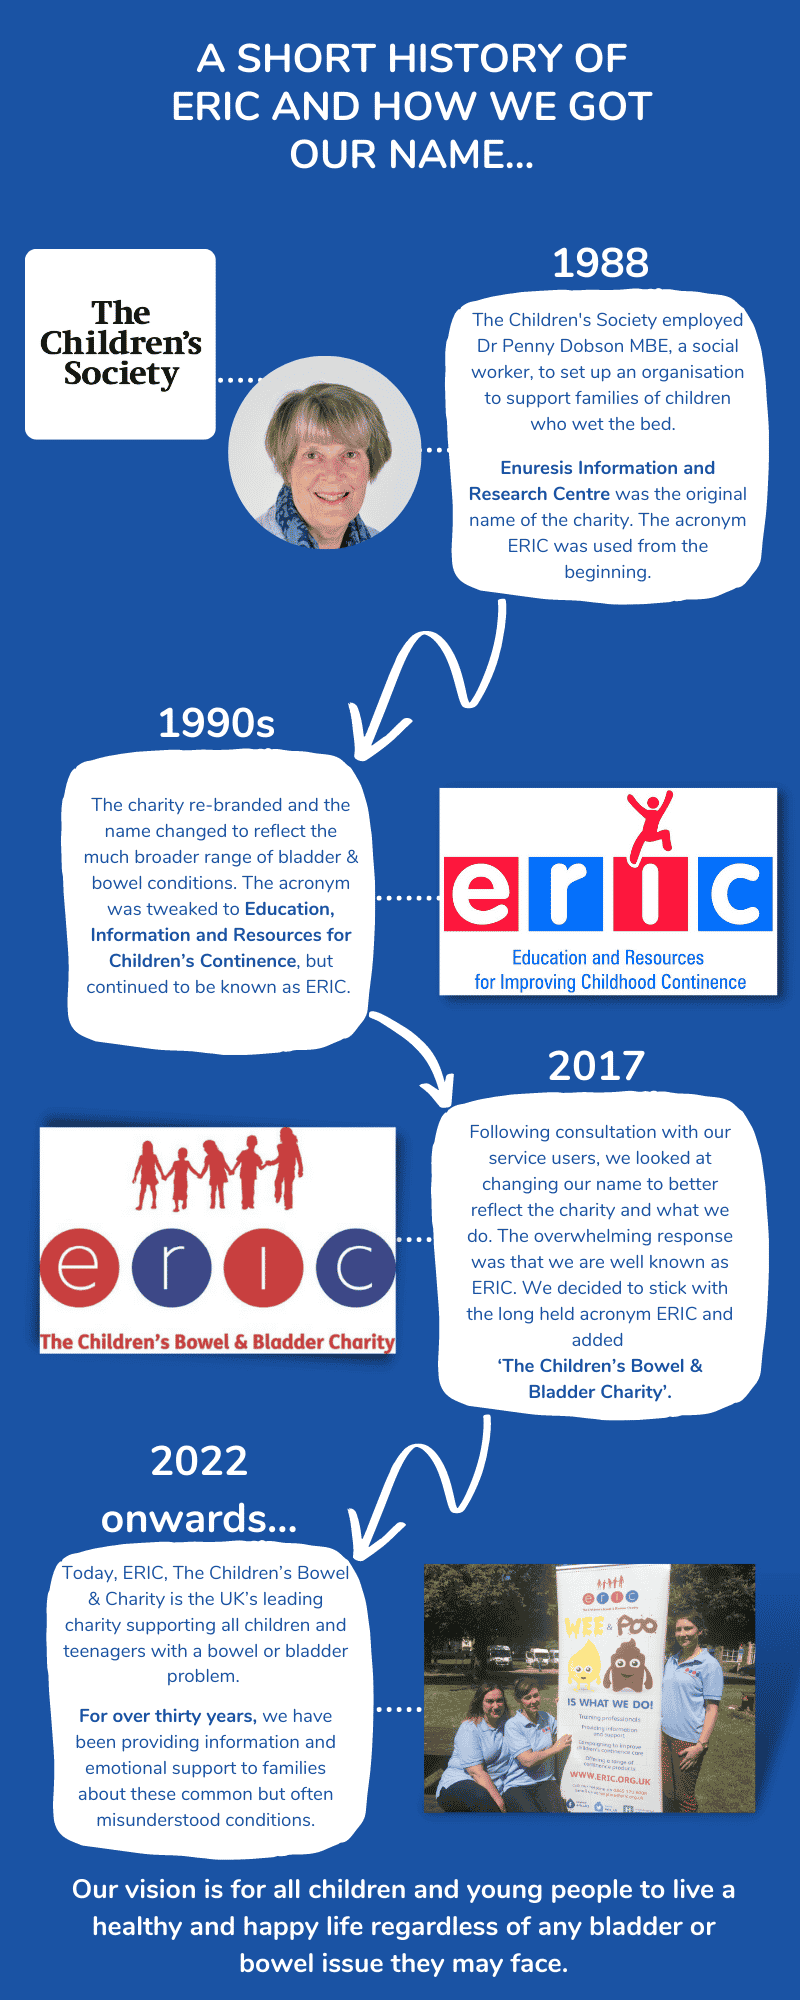 infographic showing ERIC's timeline history